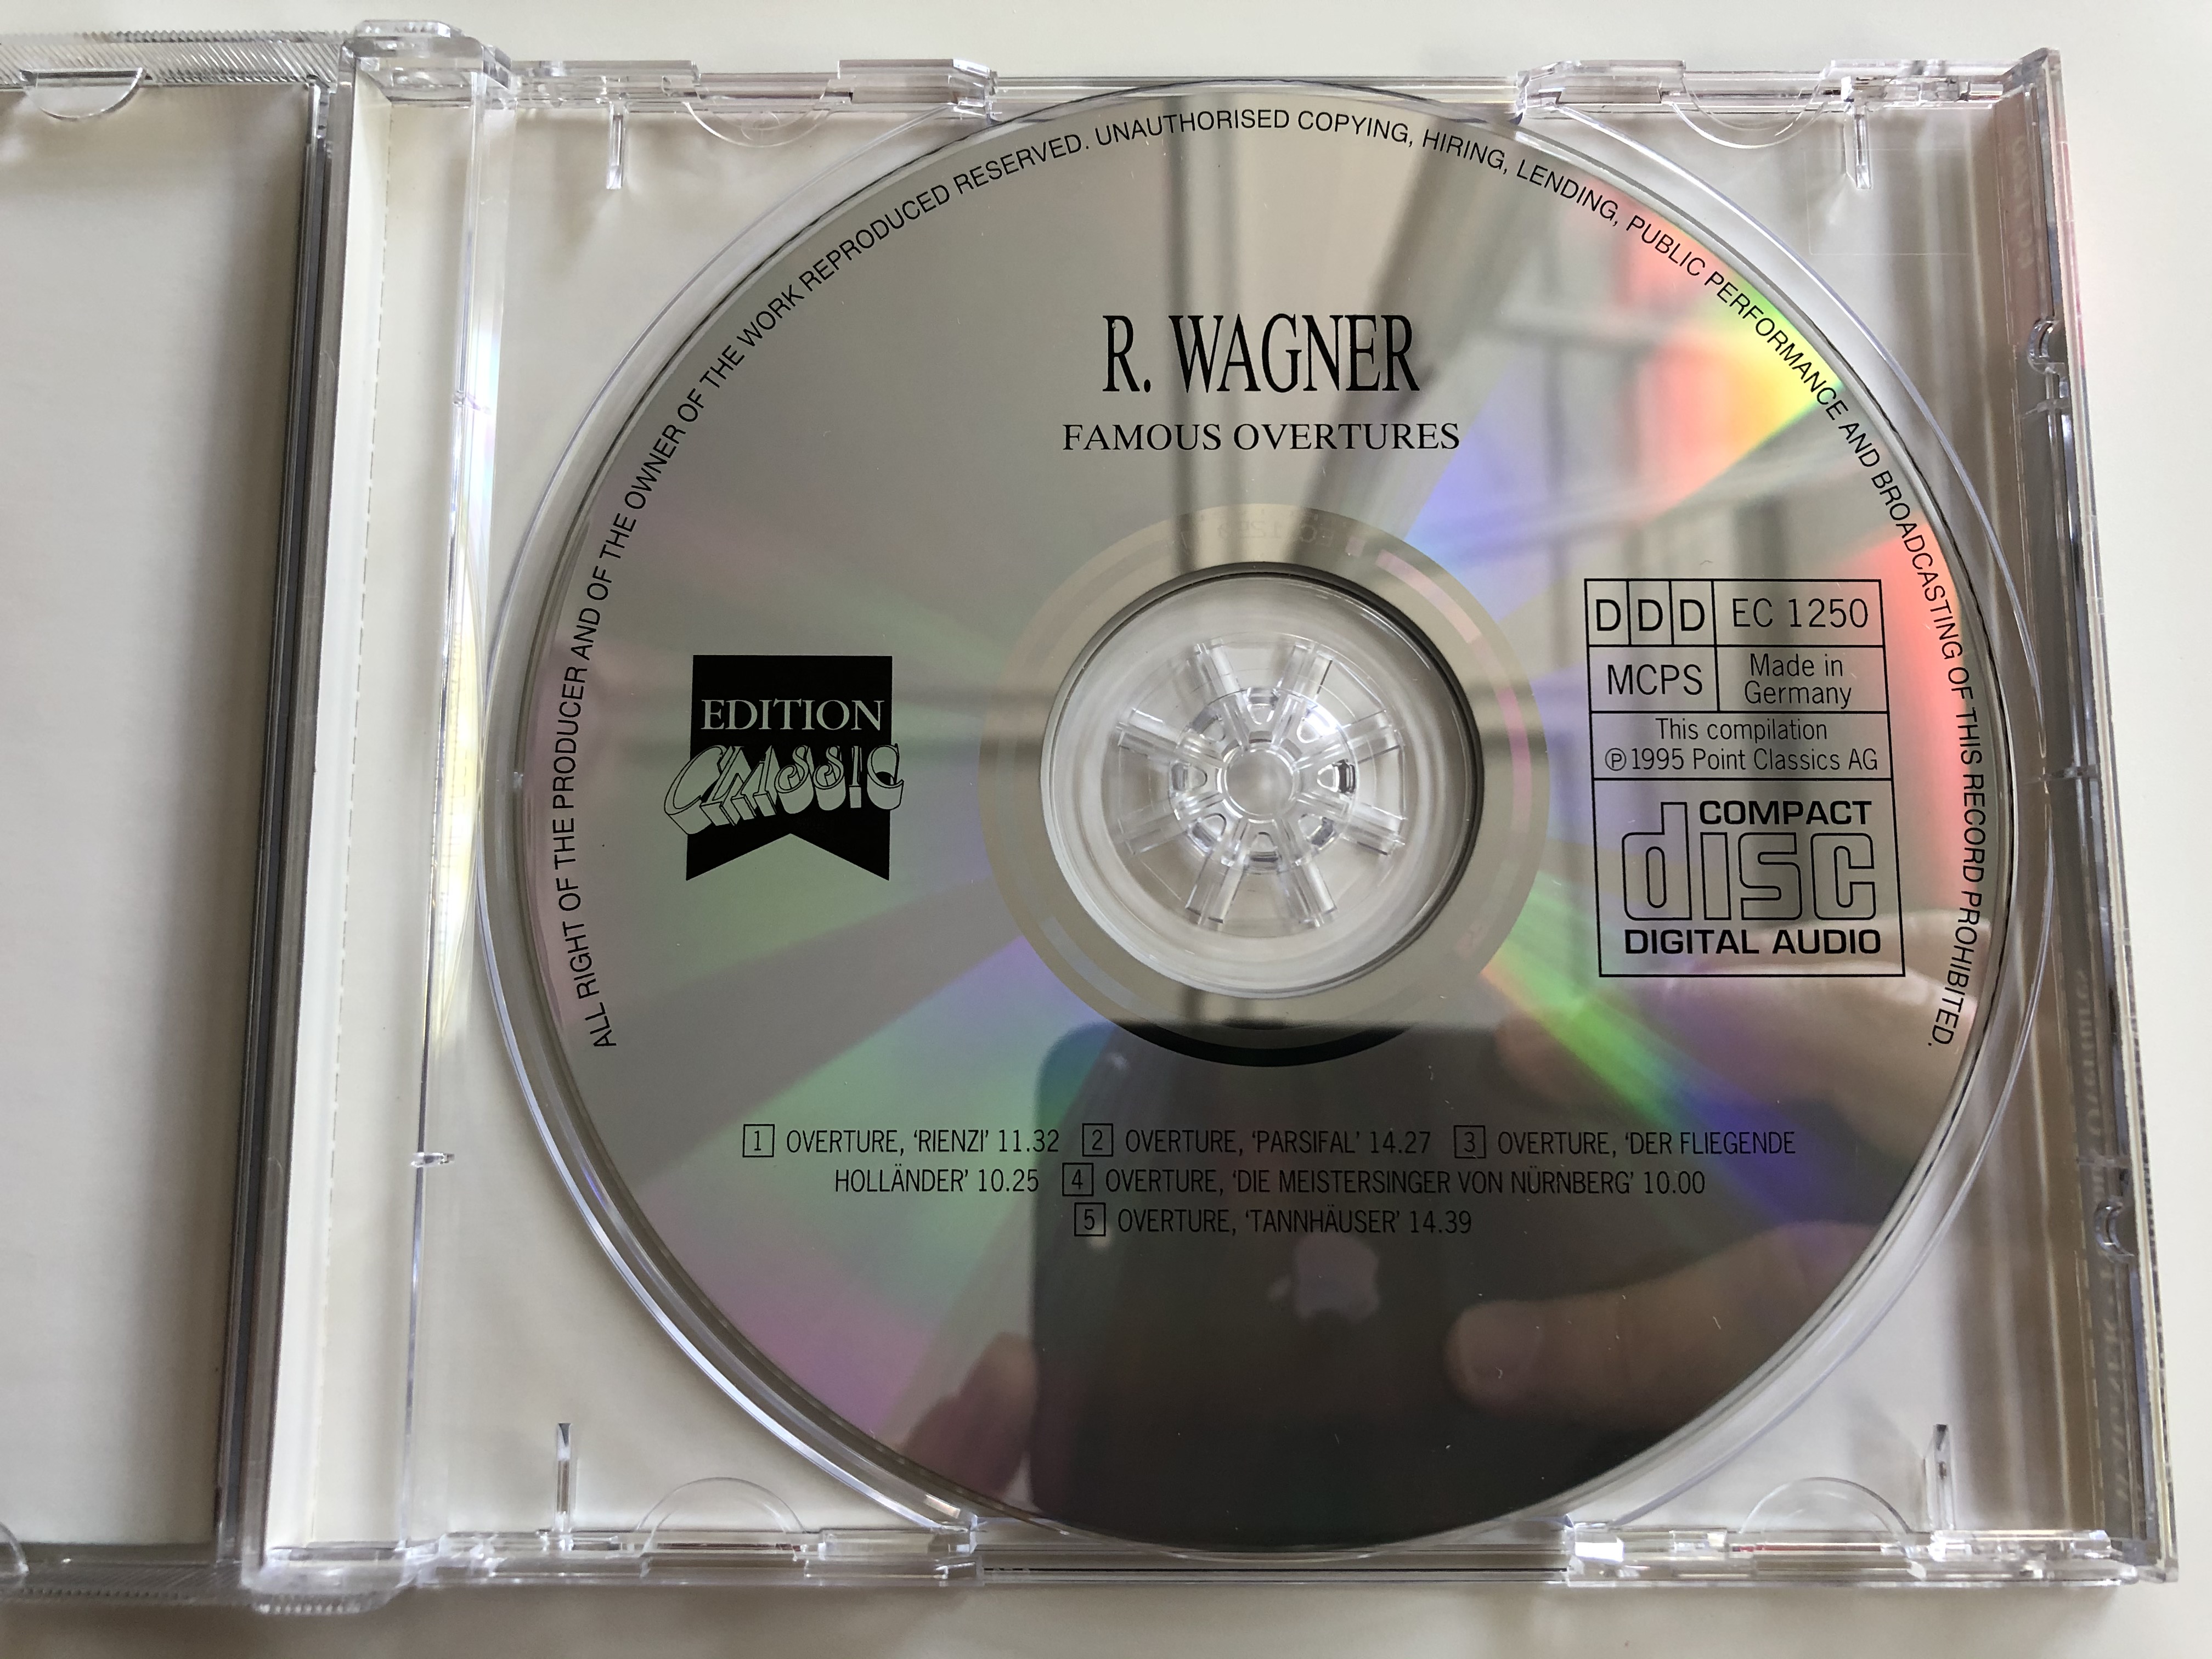 famous-overtures-wagner-edition-classic-audio-cd-1995-ec-1250-2-.jpg